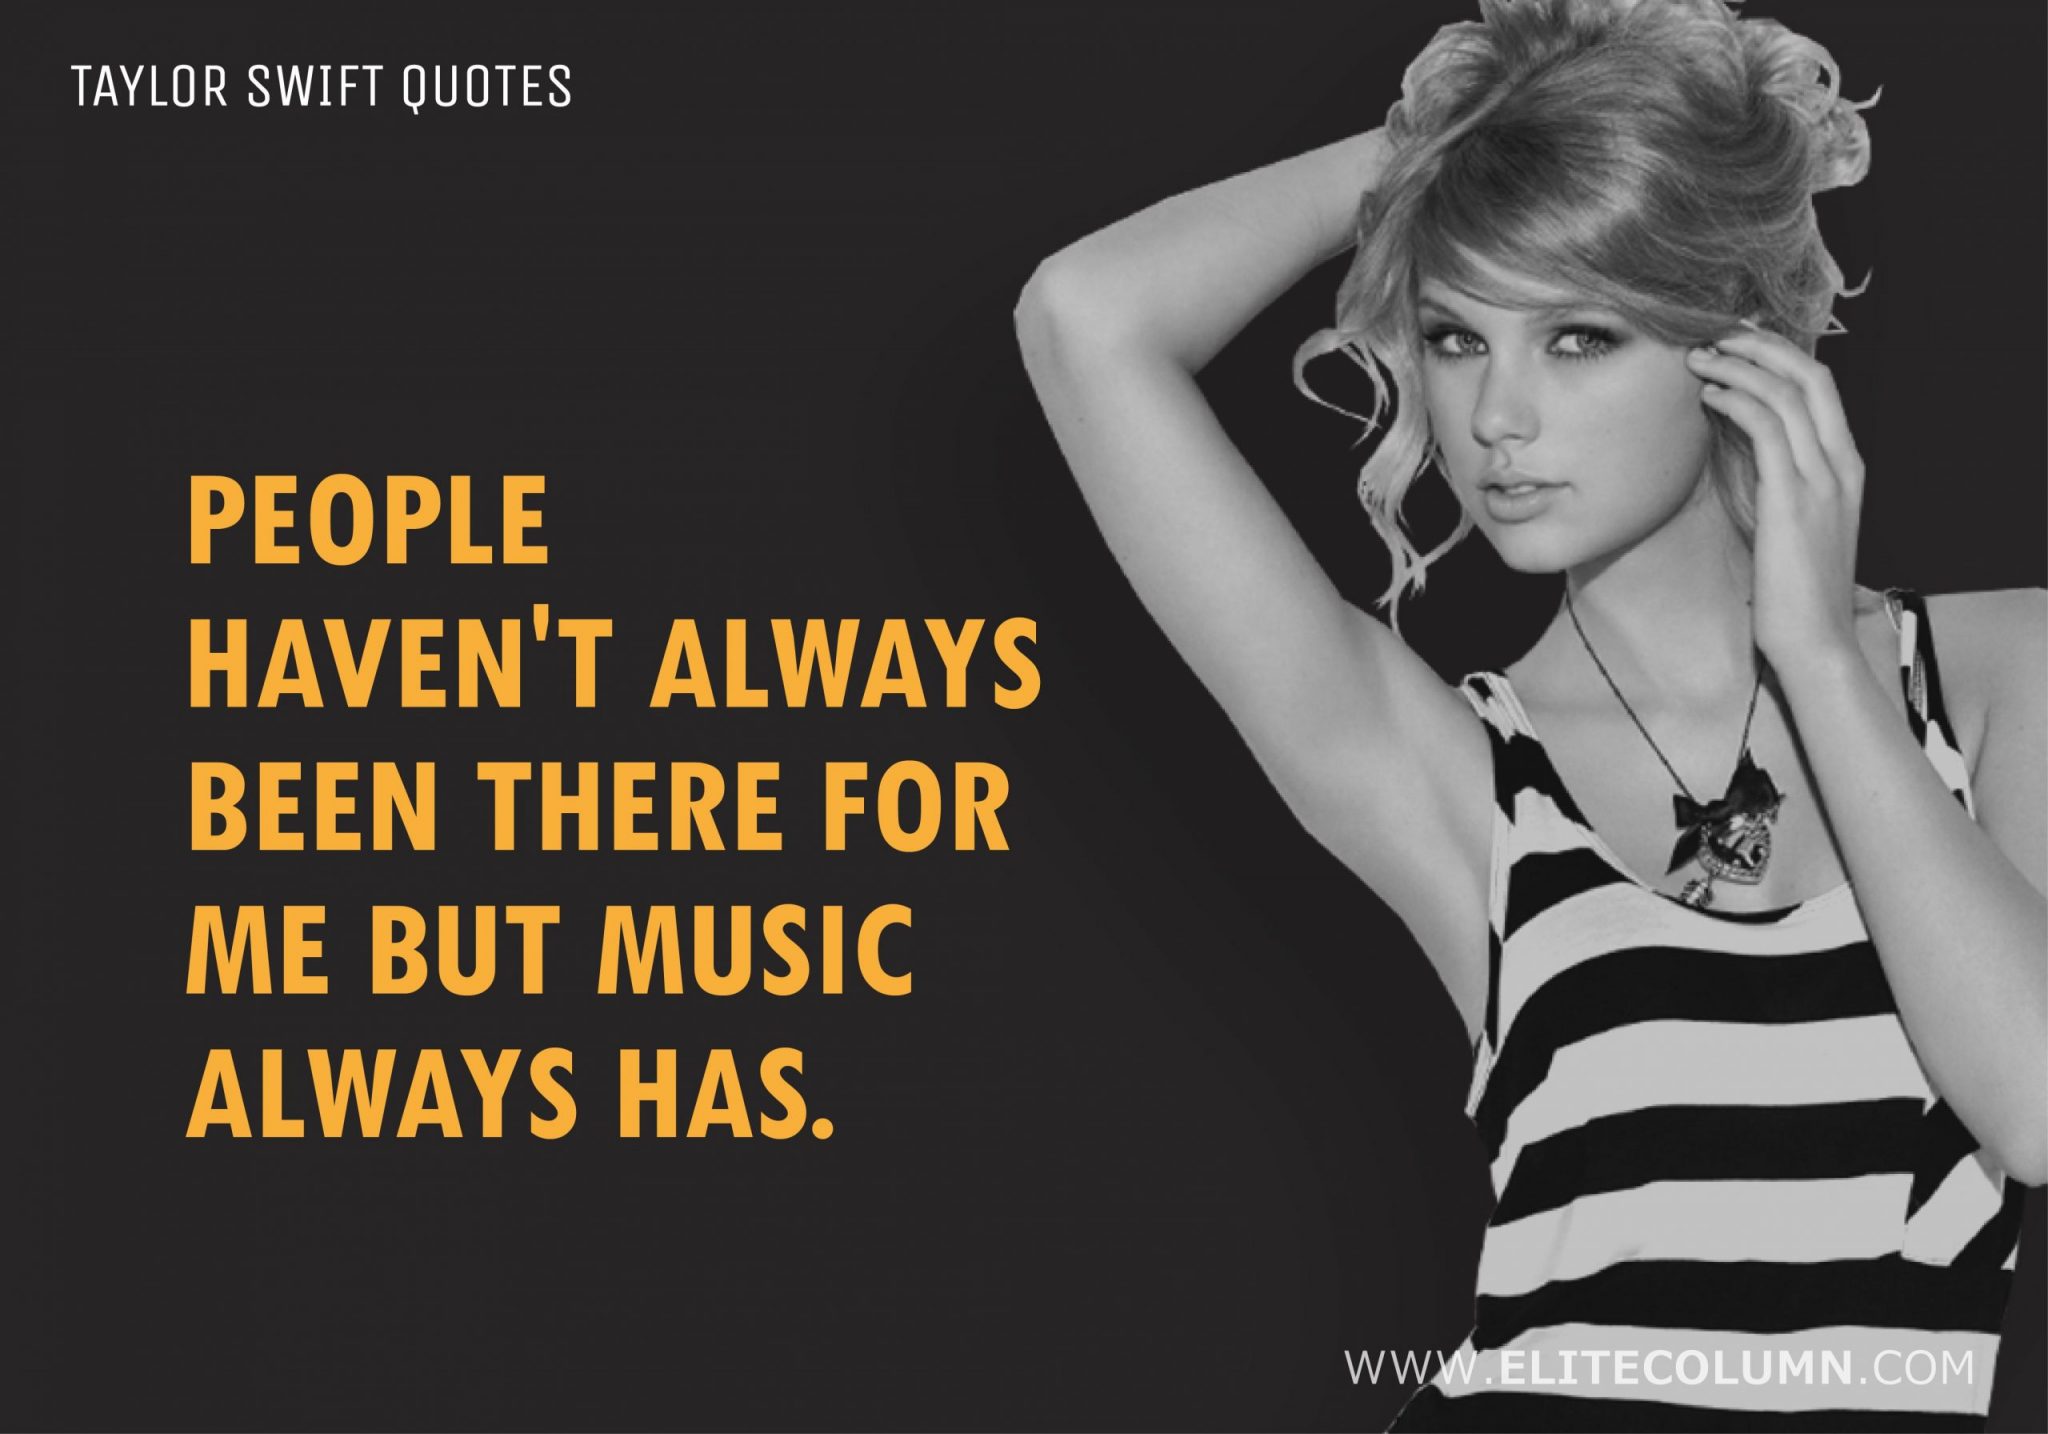 Taylor Swift Quotes (7)